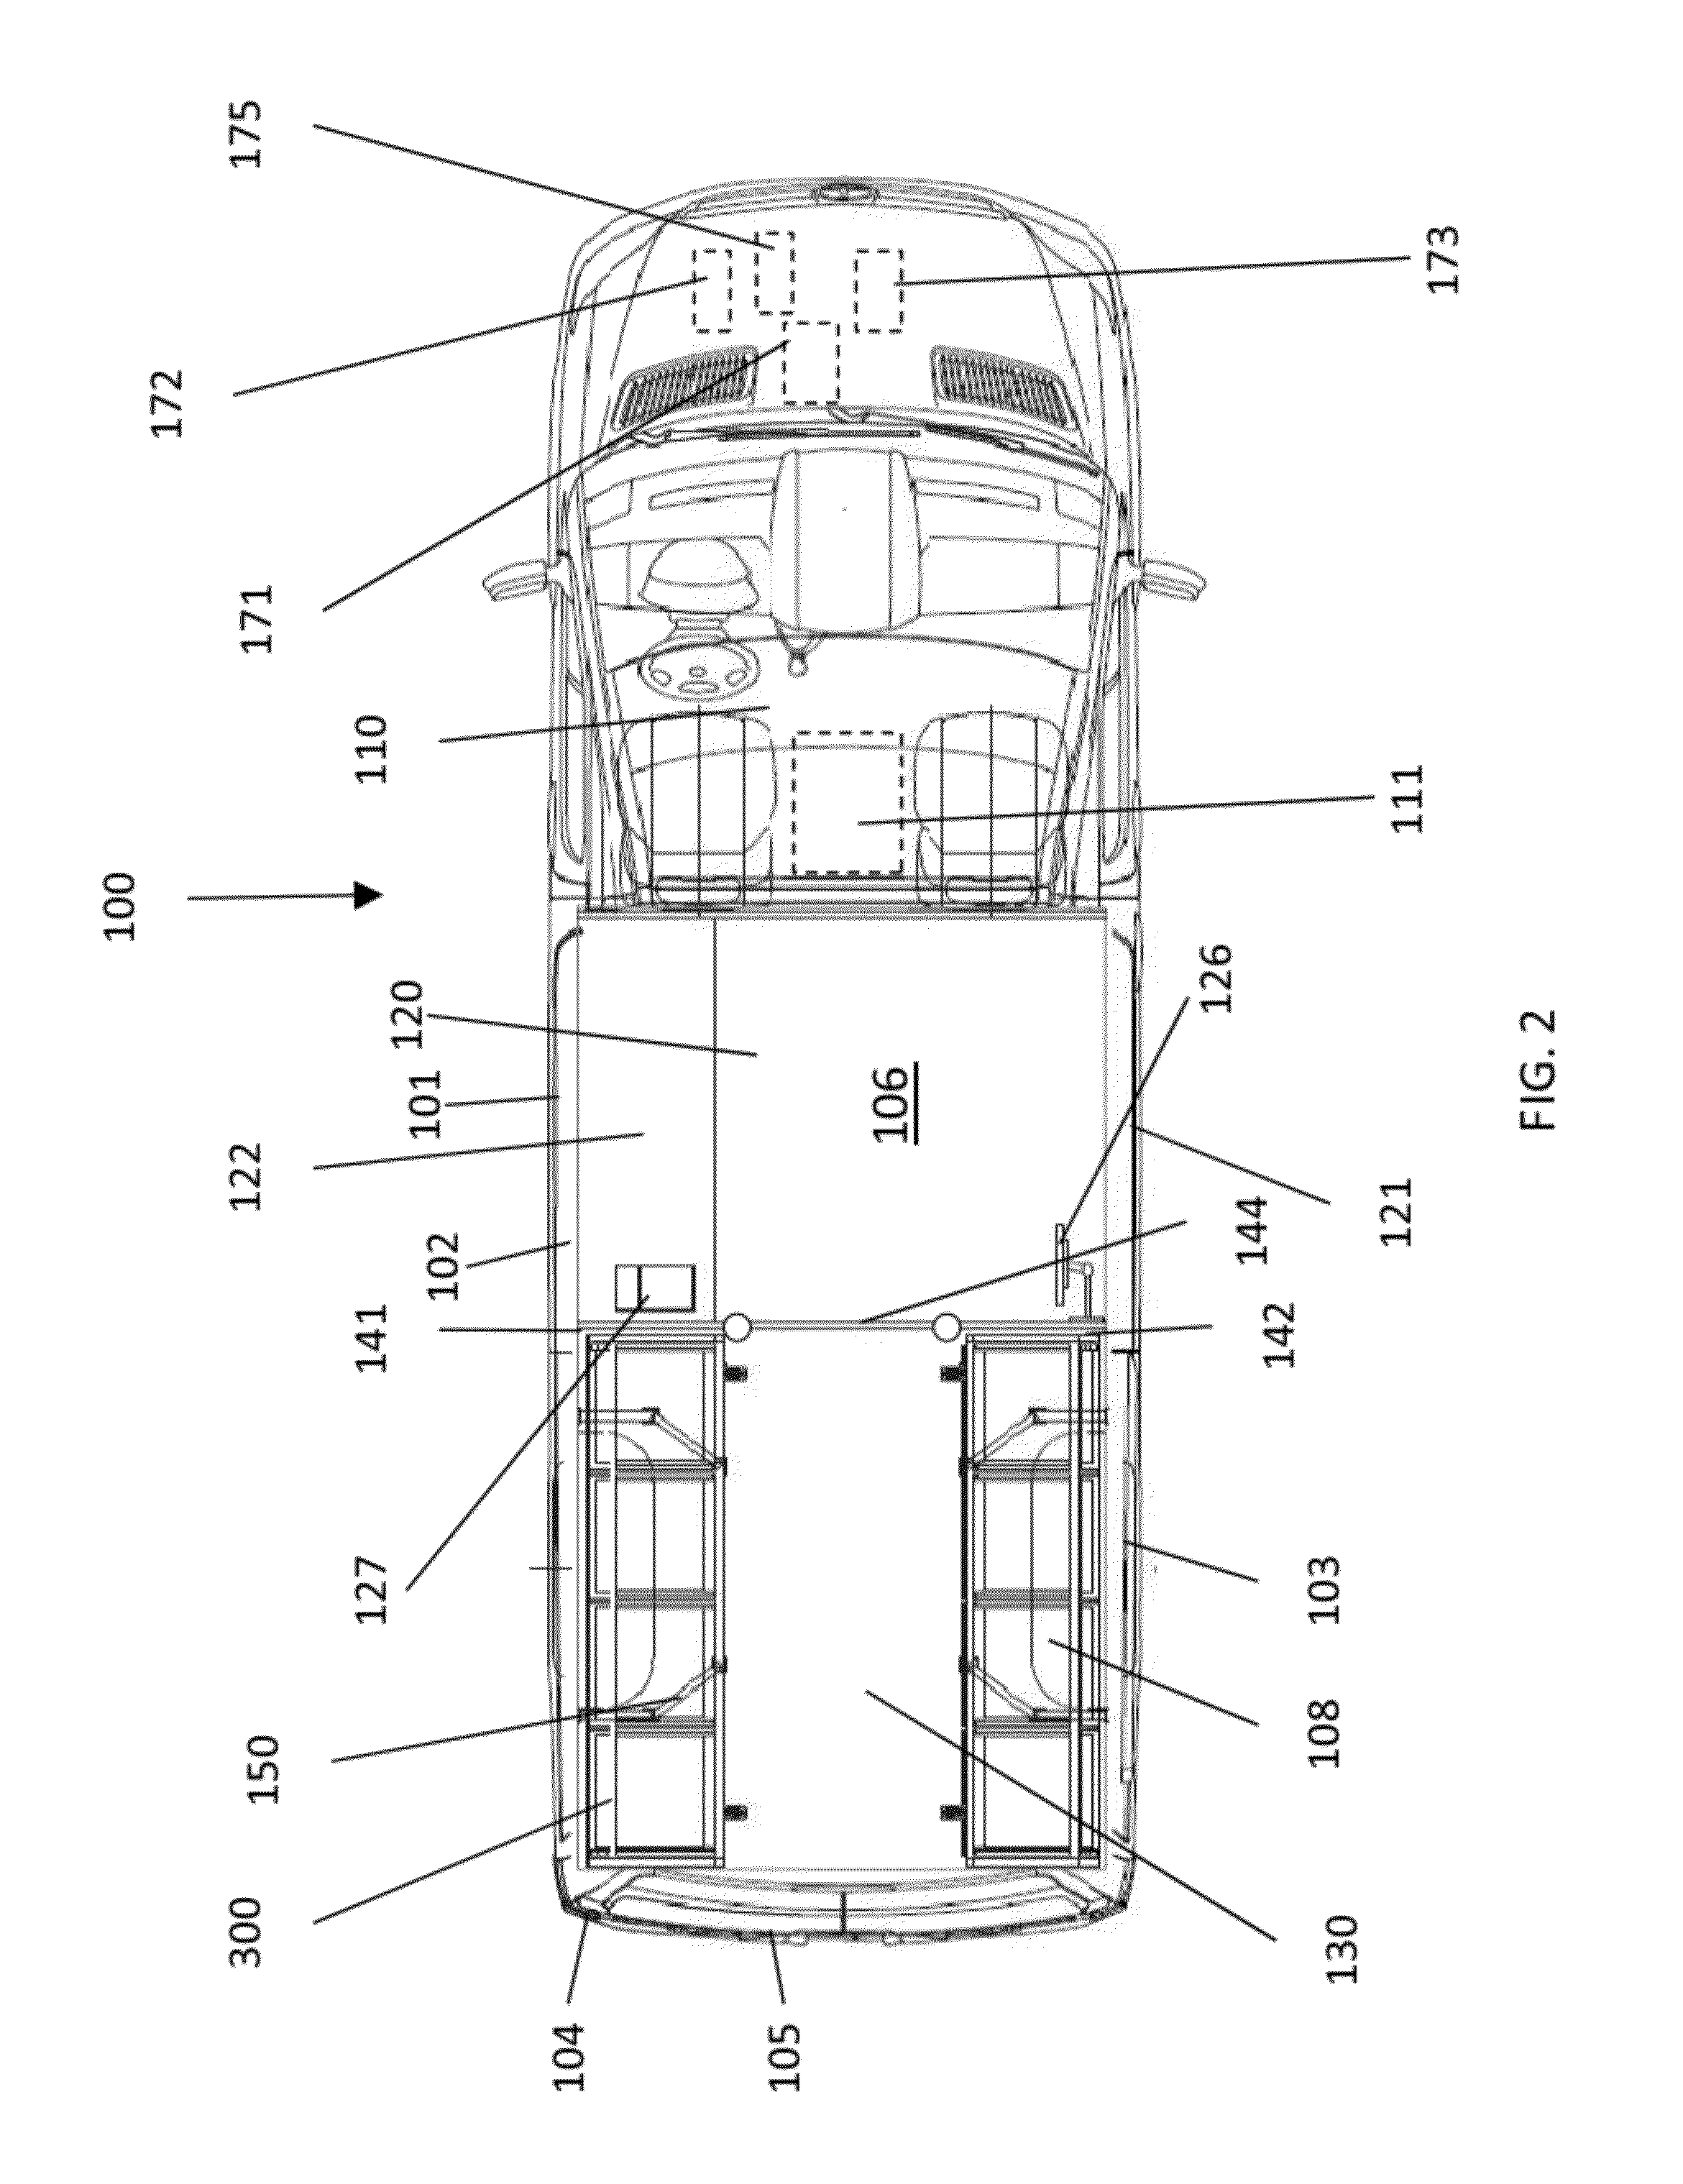 Mobile product retail system and methods thereof